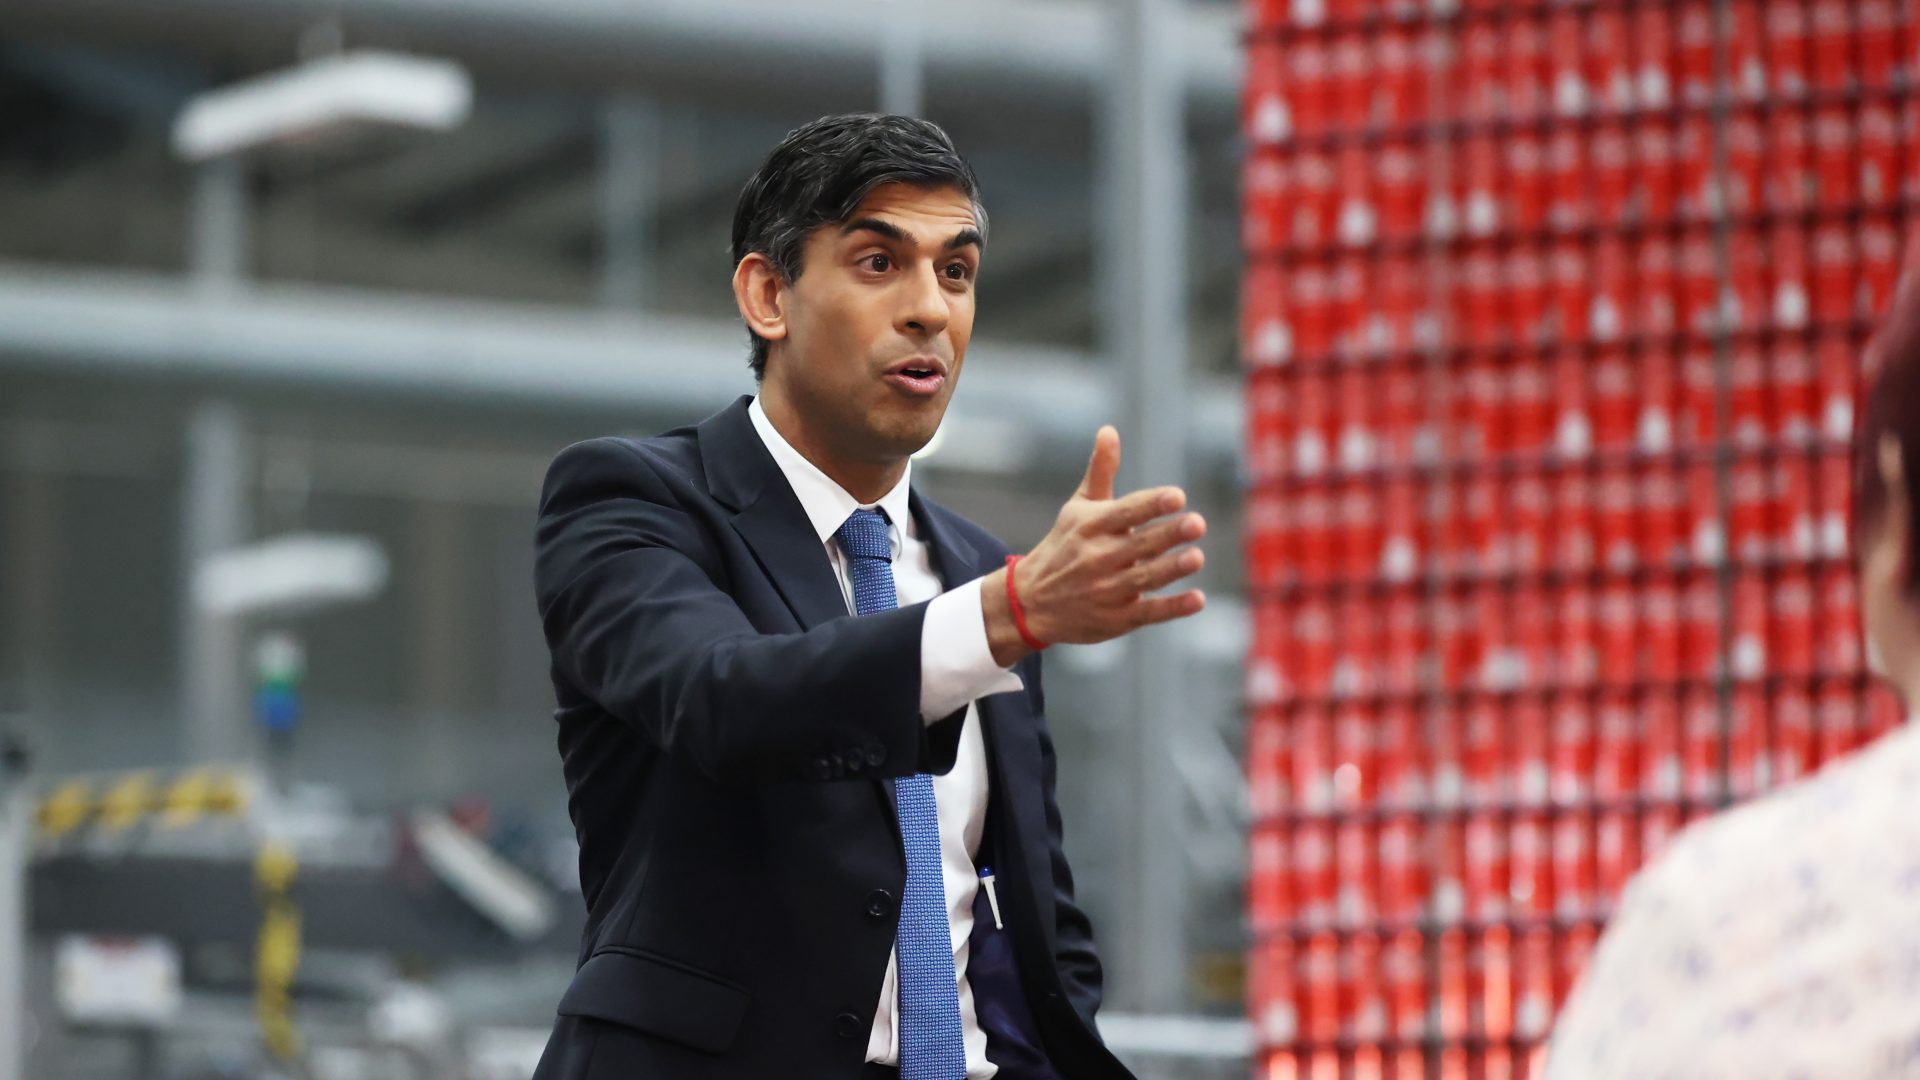 Prime Minister Rishi Sunak holds a Q&A session with local business leaders during a visit to Coca-Cola HBC in Lisburn, Co Antrim in Northern Ireland. Photo: Liam McBurney/PA Wire/PA Images